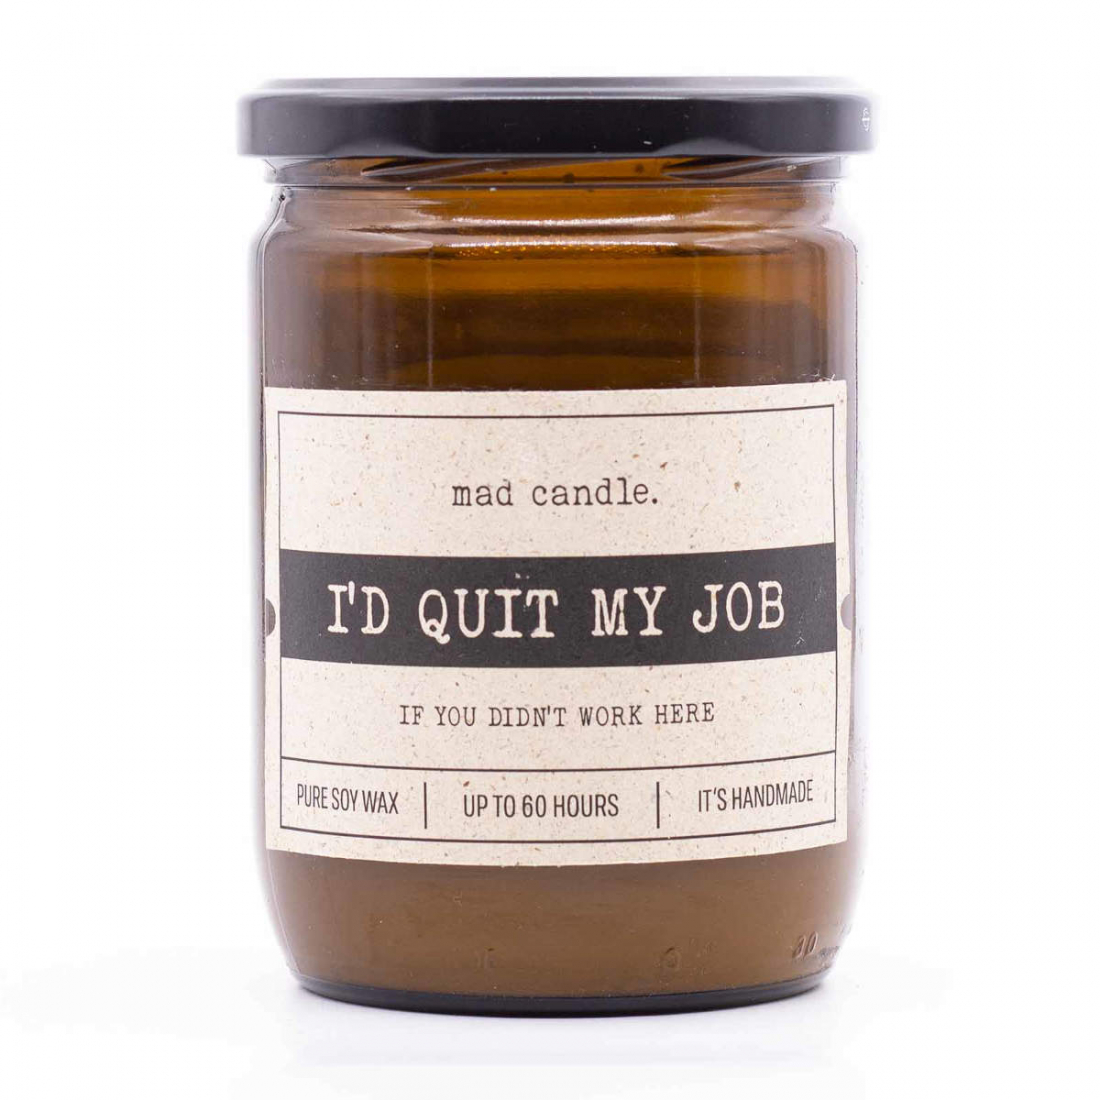 'I'd Quit My Job' Scented Candle - 360 g